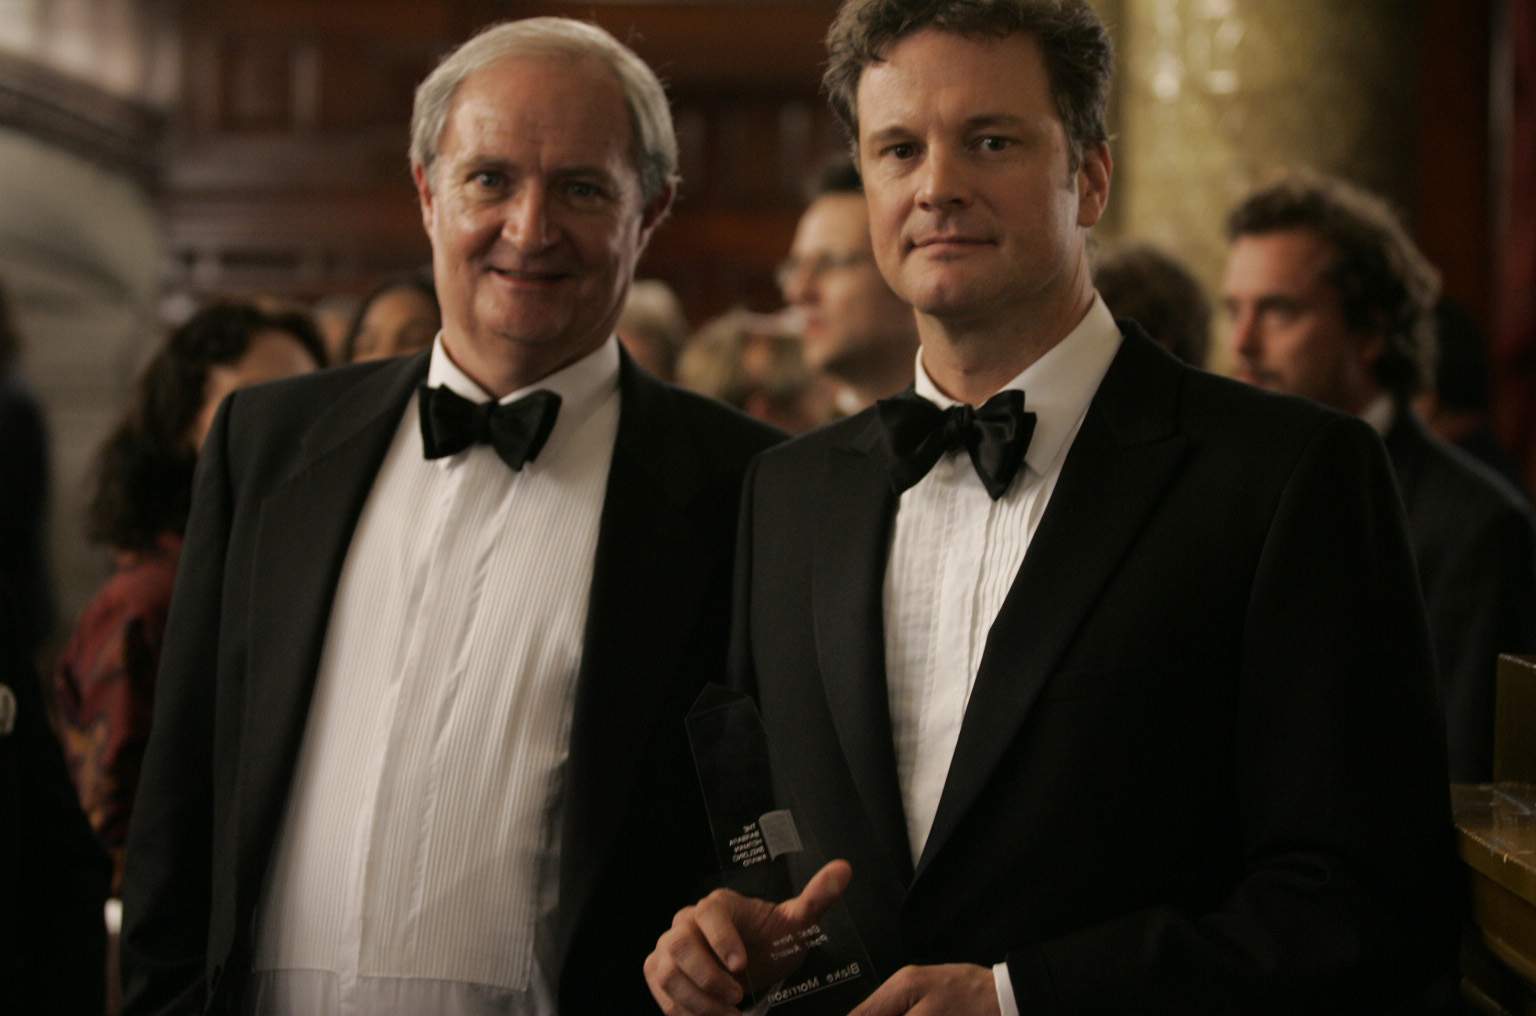 Jim Broadbent as Arthur Morrison and Colin Firth as Blake Morrison in Sony Pictures Classics' When Did You Last See Your Father? (2007).